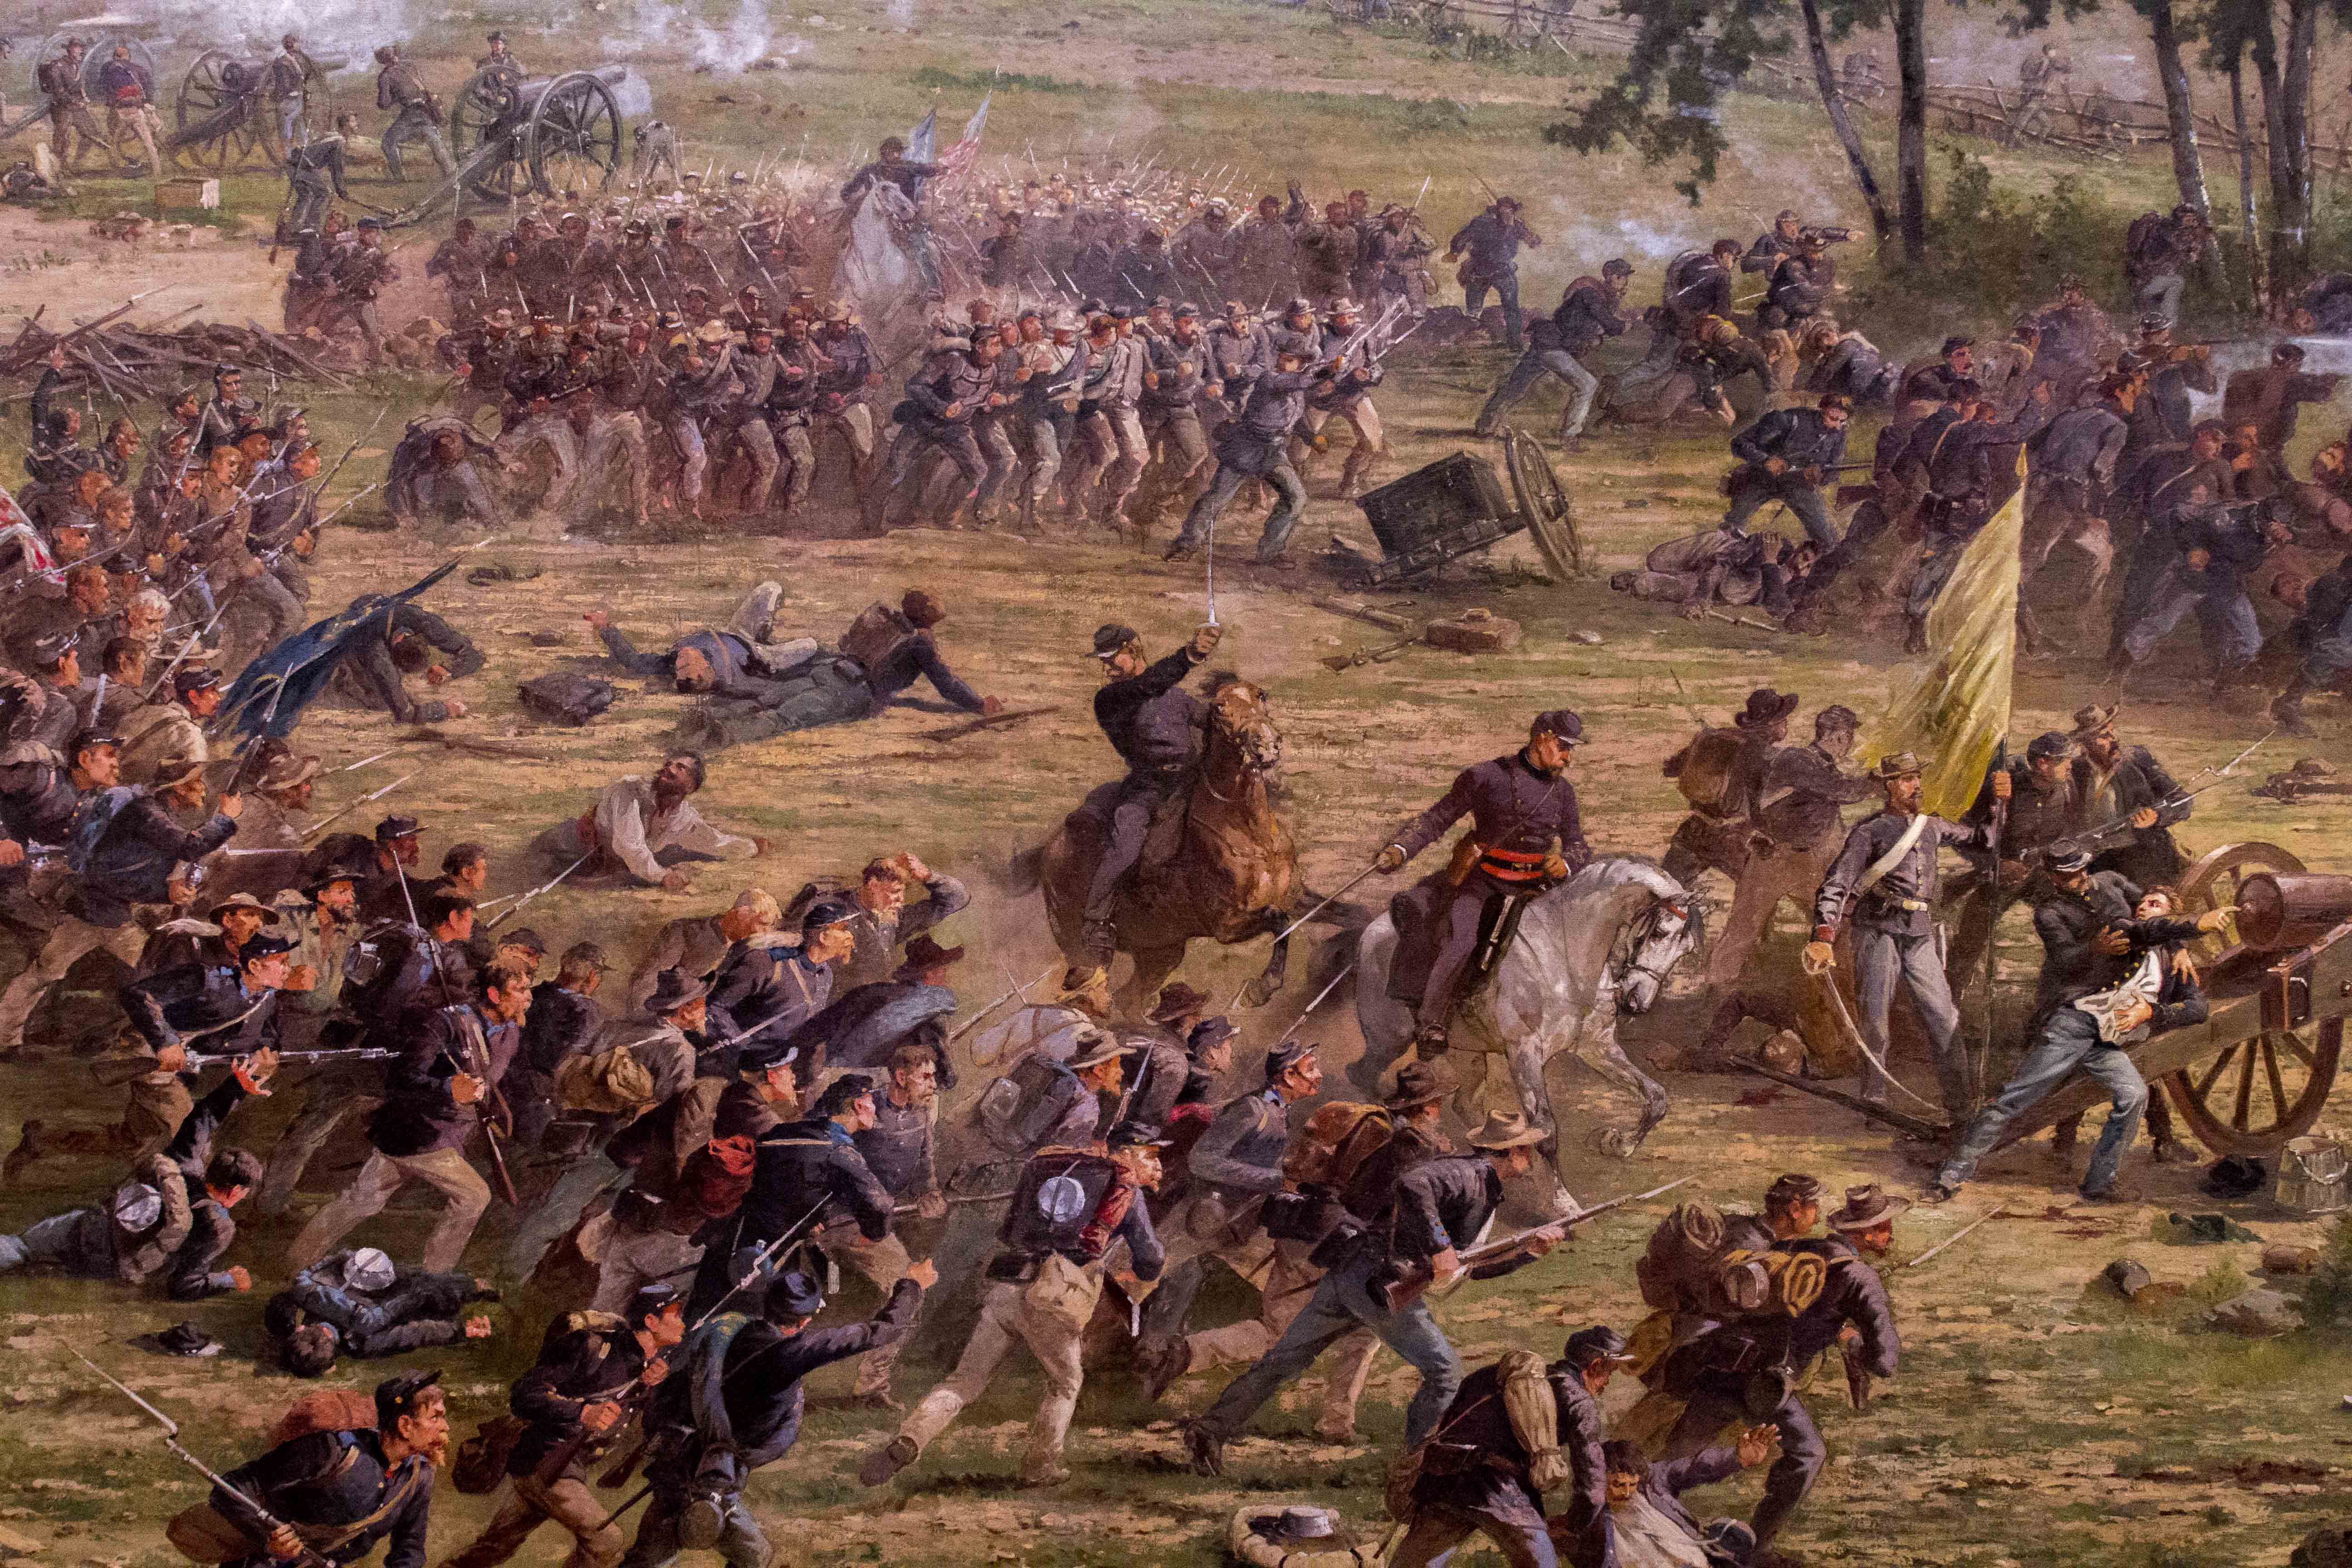 The Cyclorama painting